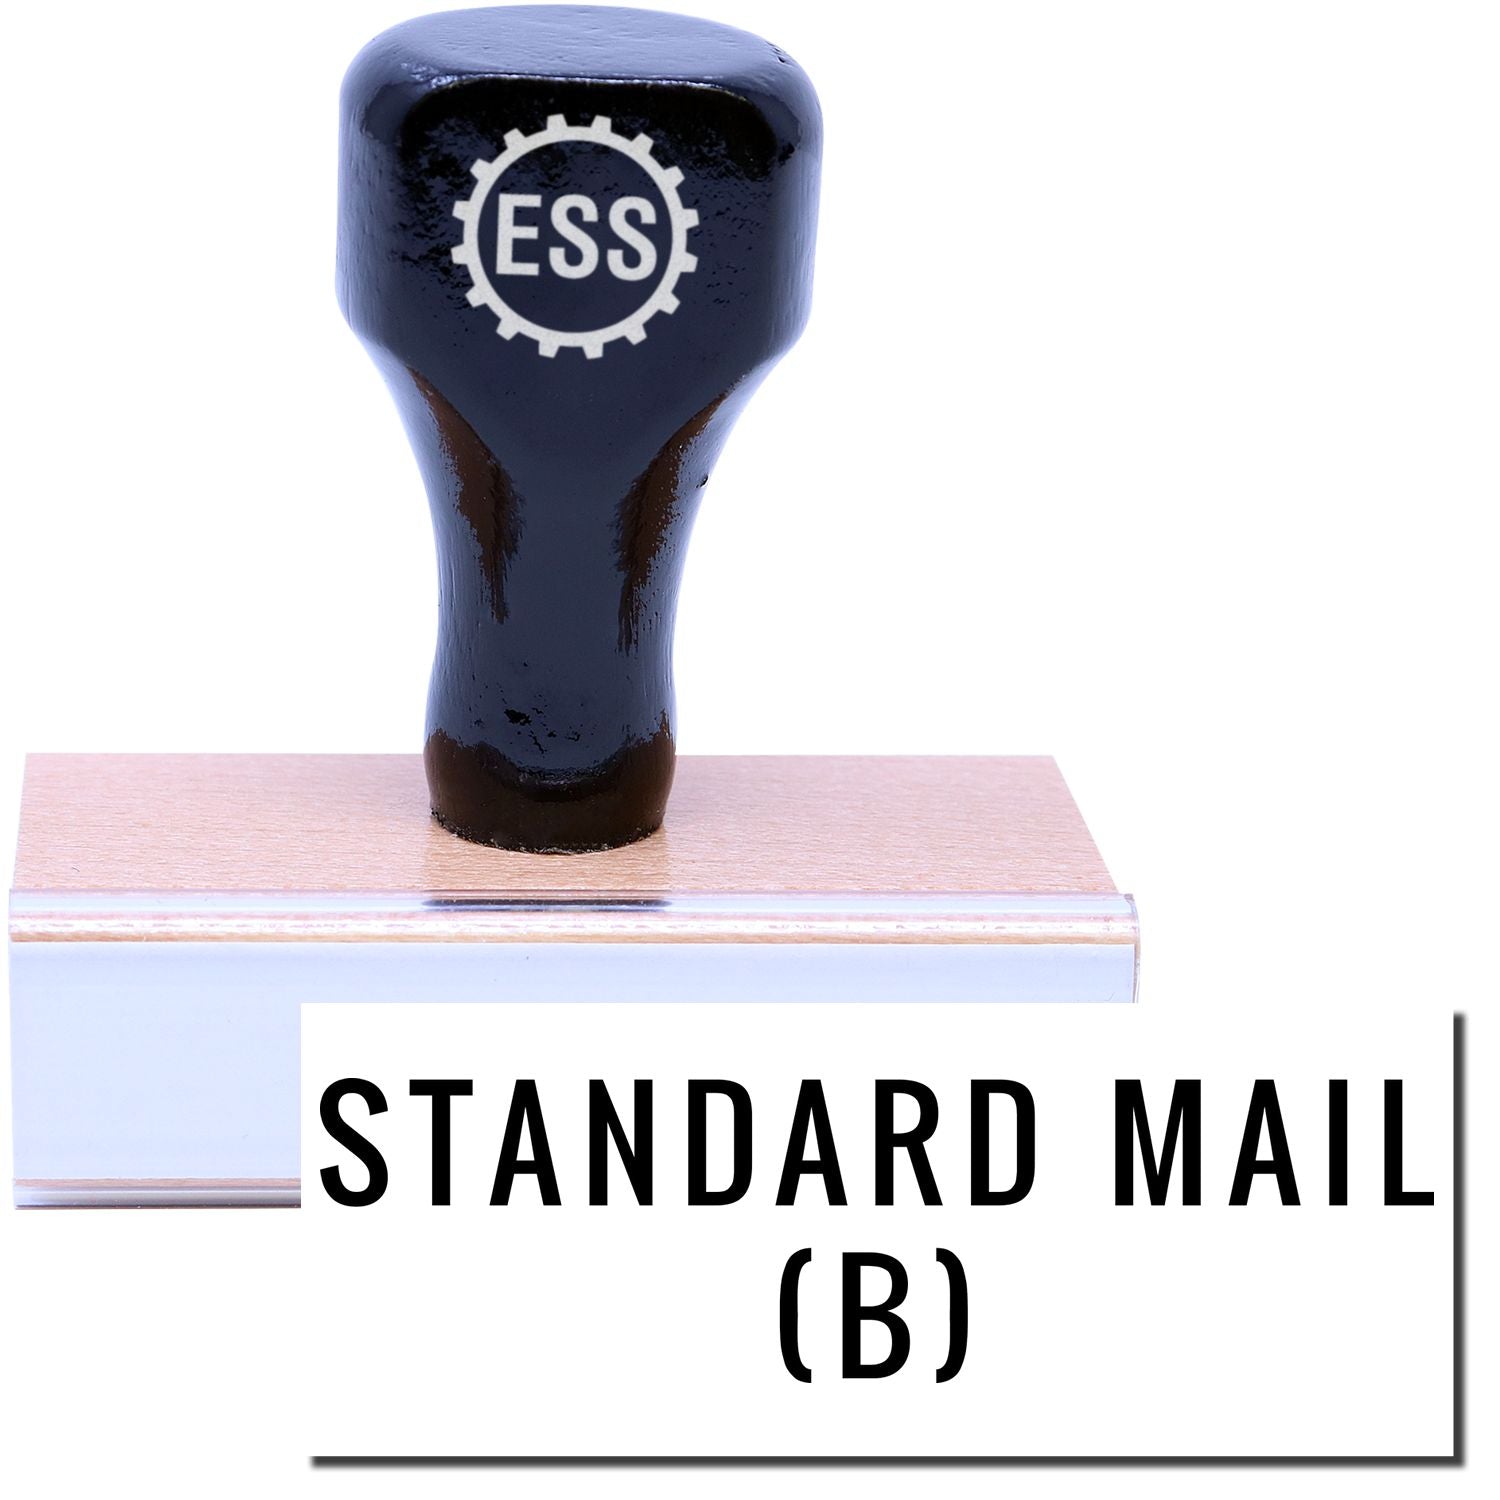 A stock office rubber stamp with a stamped image showing how the text "STANDARD MAIL (B)" in a large font is displayed after stamping.